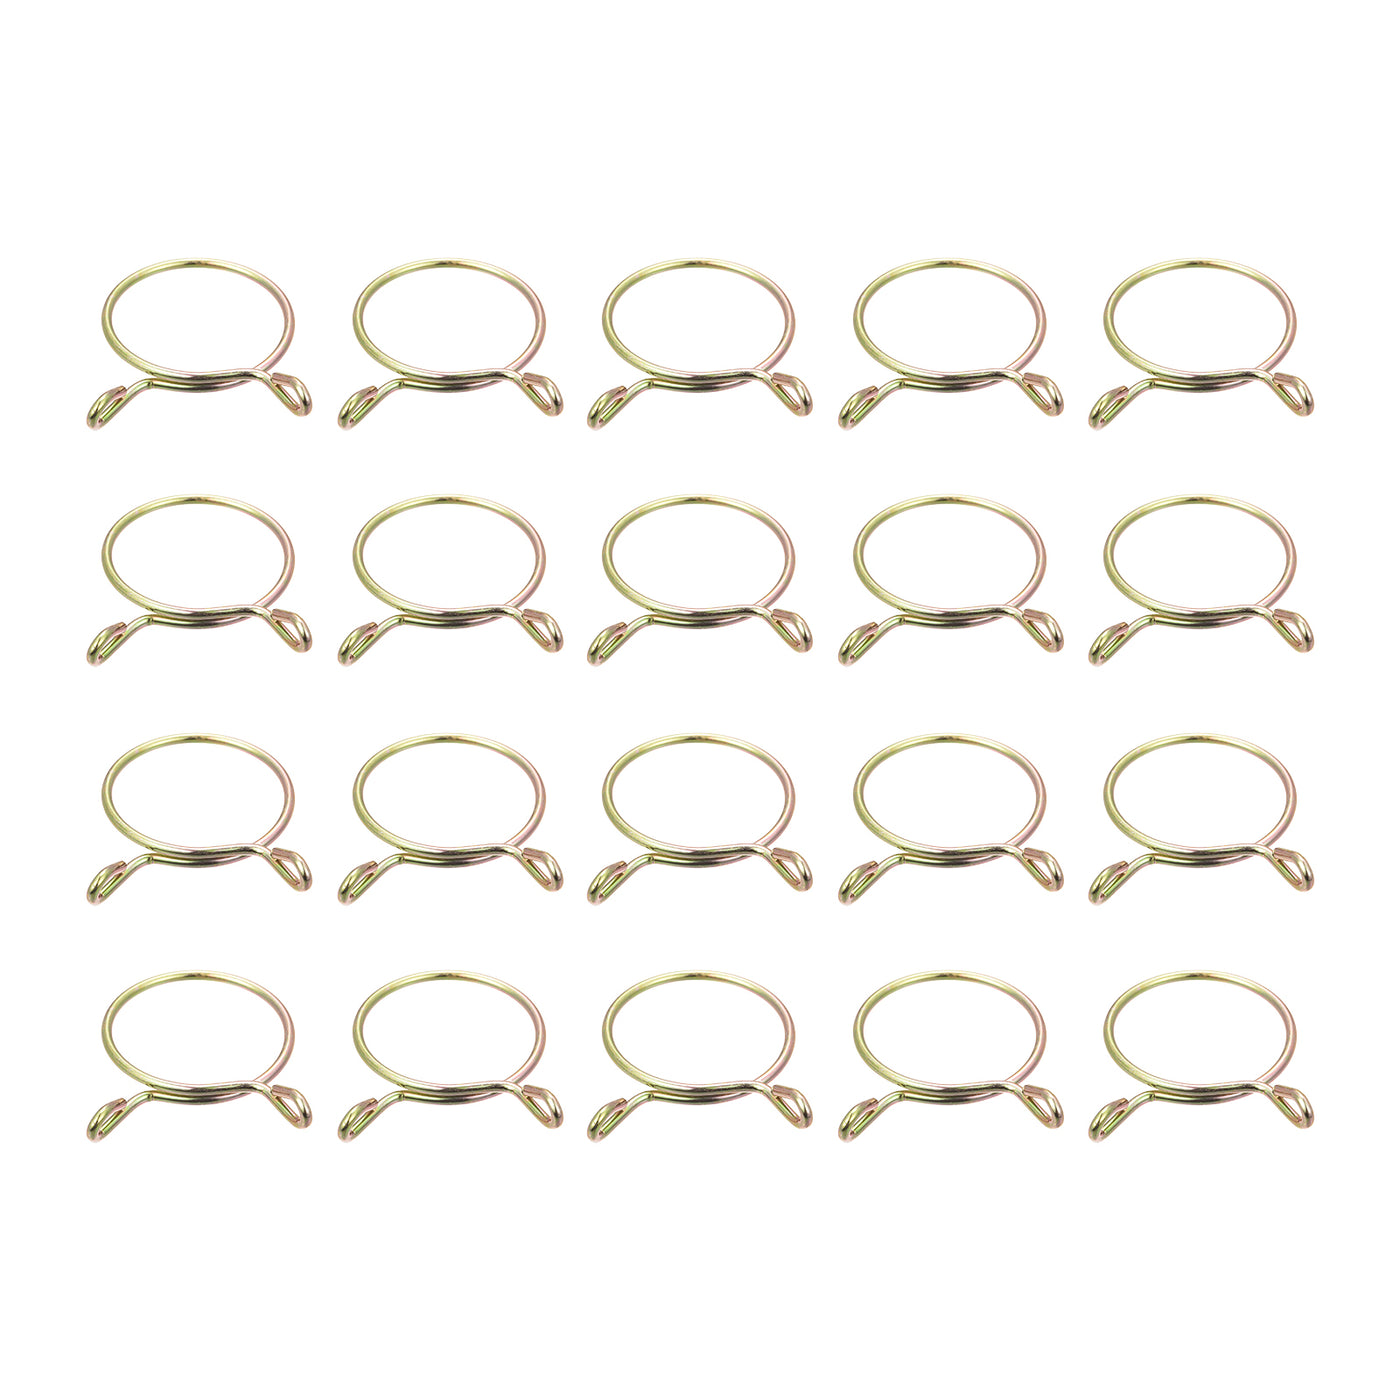 Uxcell Uxcell Fuel Line Hose Clips, 20pcs 42mm 65Mn Steel Tubing Spring Clamps